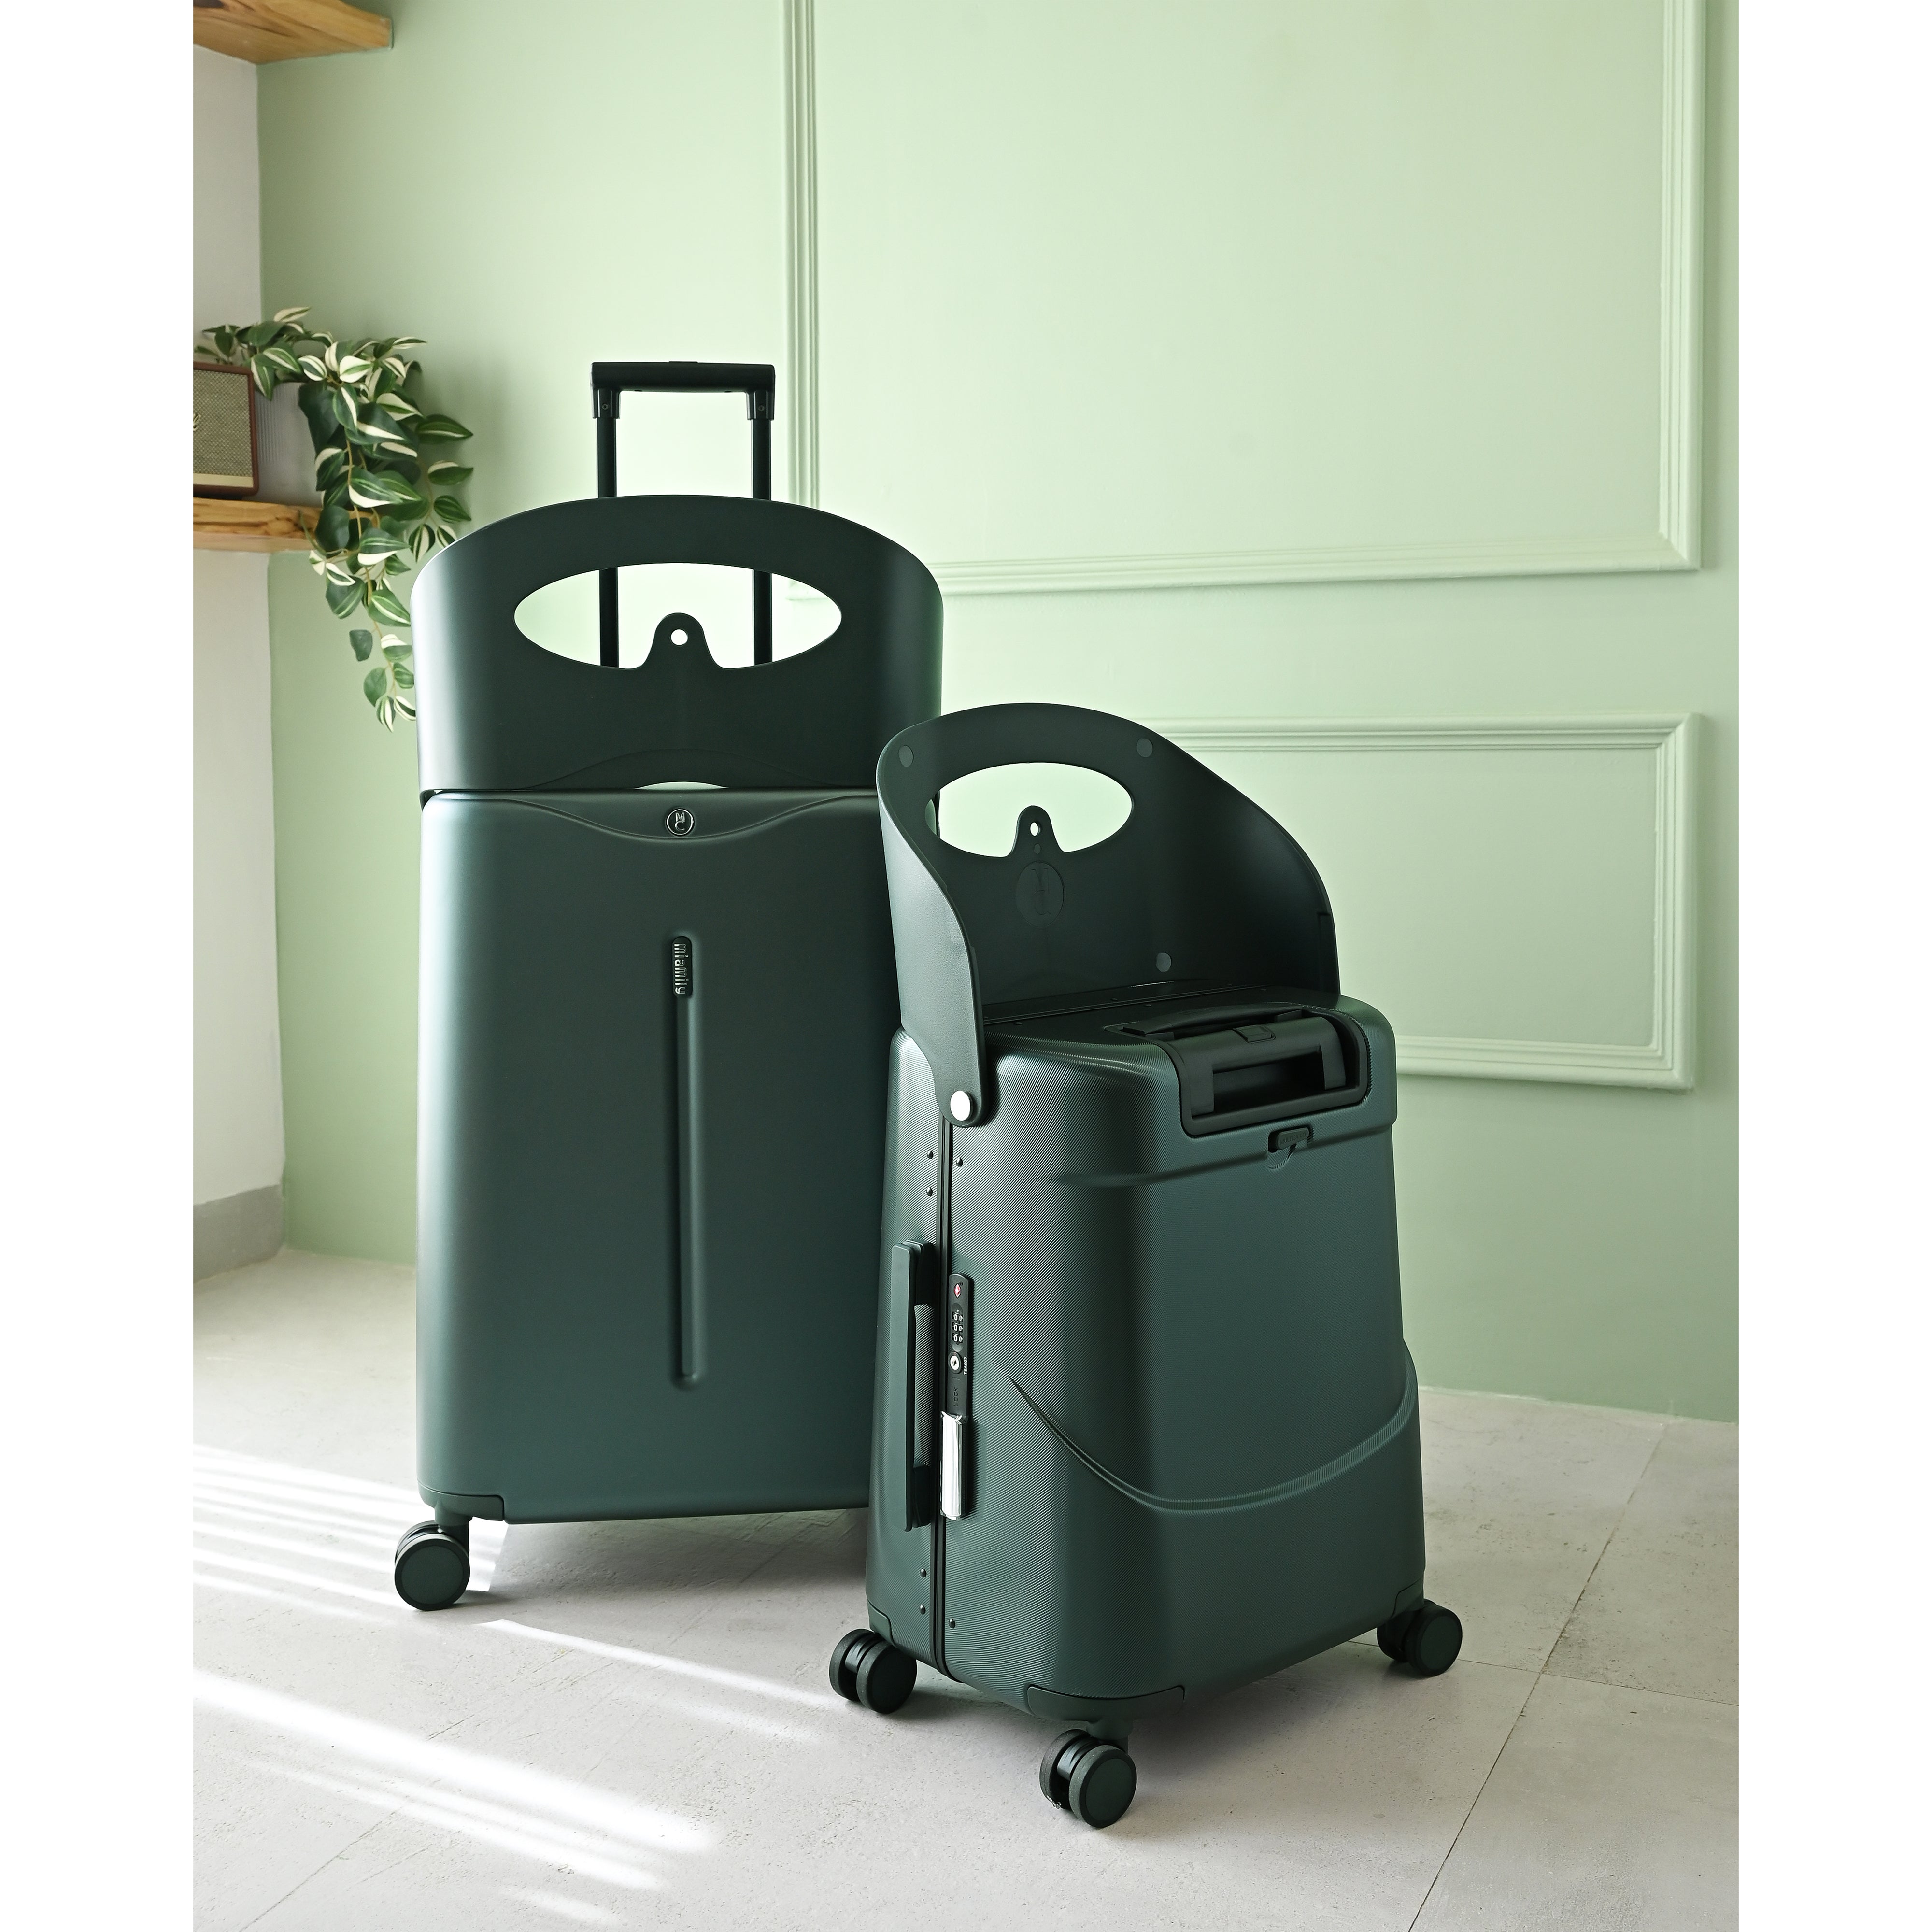 Miamily Forest Green Ride On Trolley Carry-On Luggage 18 inches